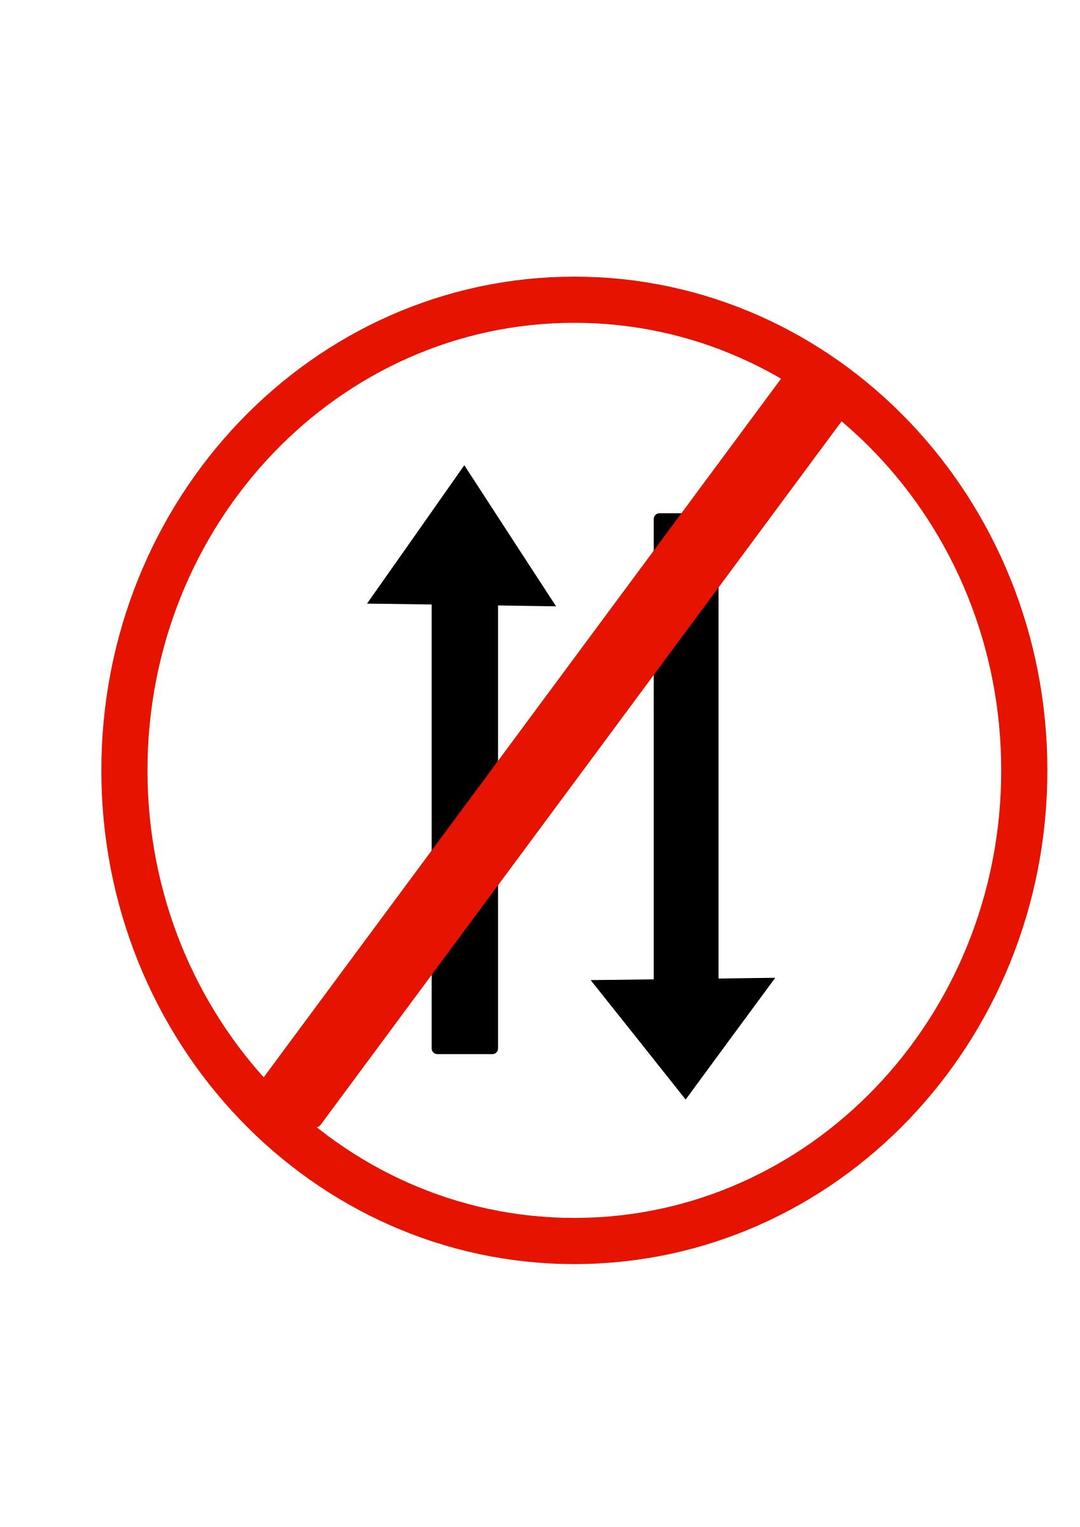 Indian road sign - Vehiclesprohibited in both directions png transparent